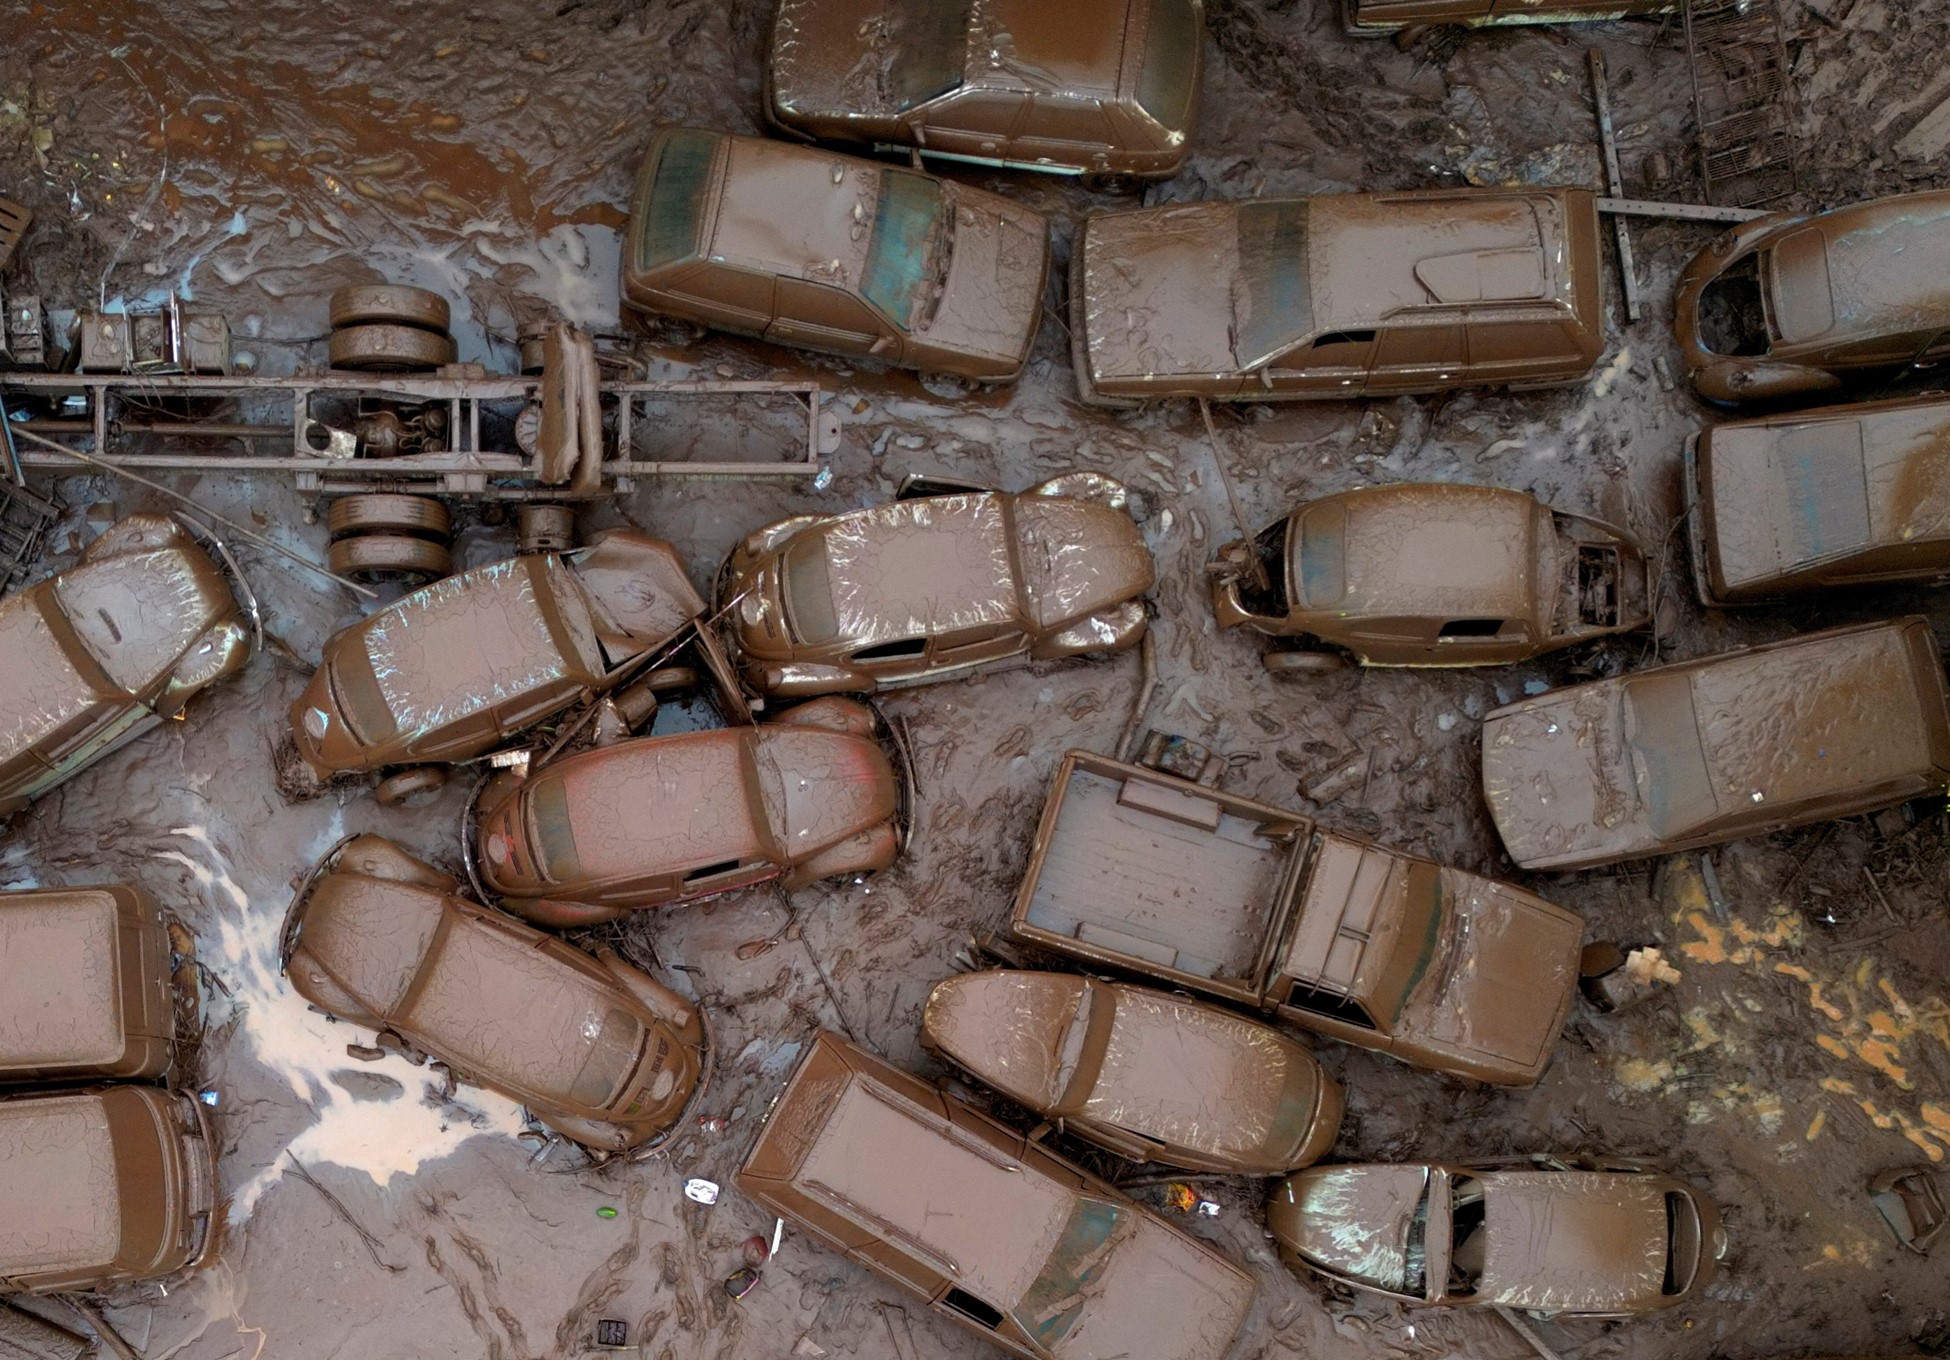 A drone view shows vehicles in the area affected by the floods, in Encantado, Rio Grande do Sul state, Brazil, May 3. Photo: Reuters